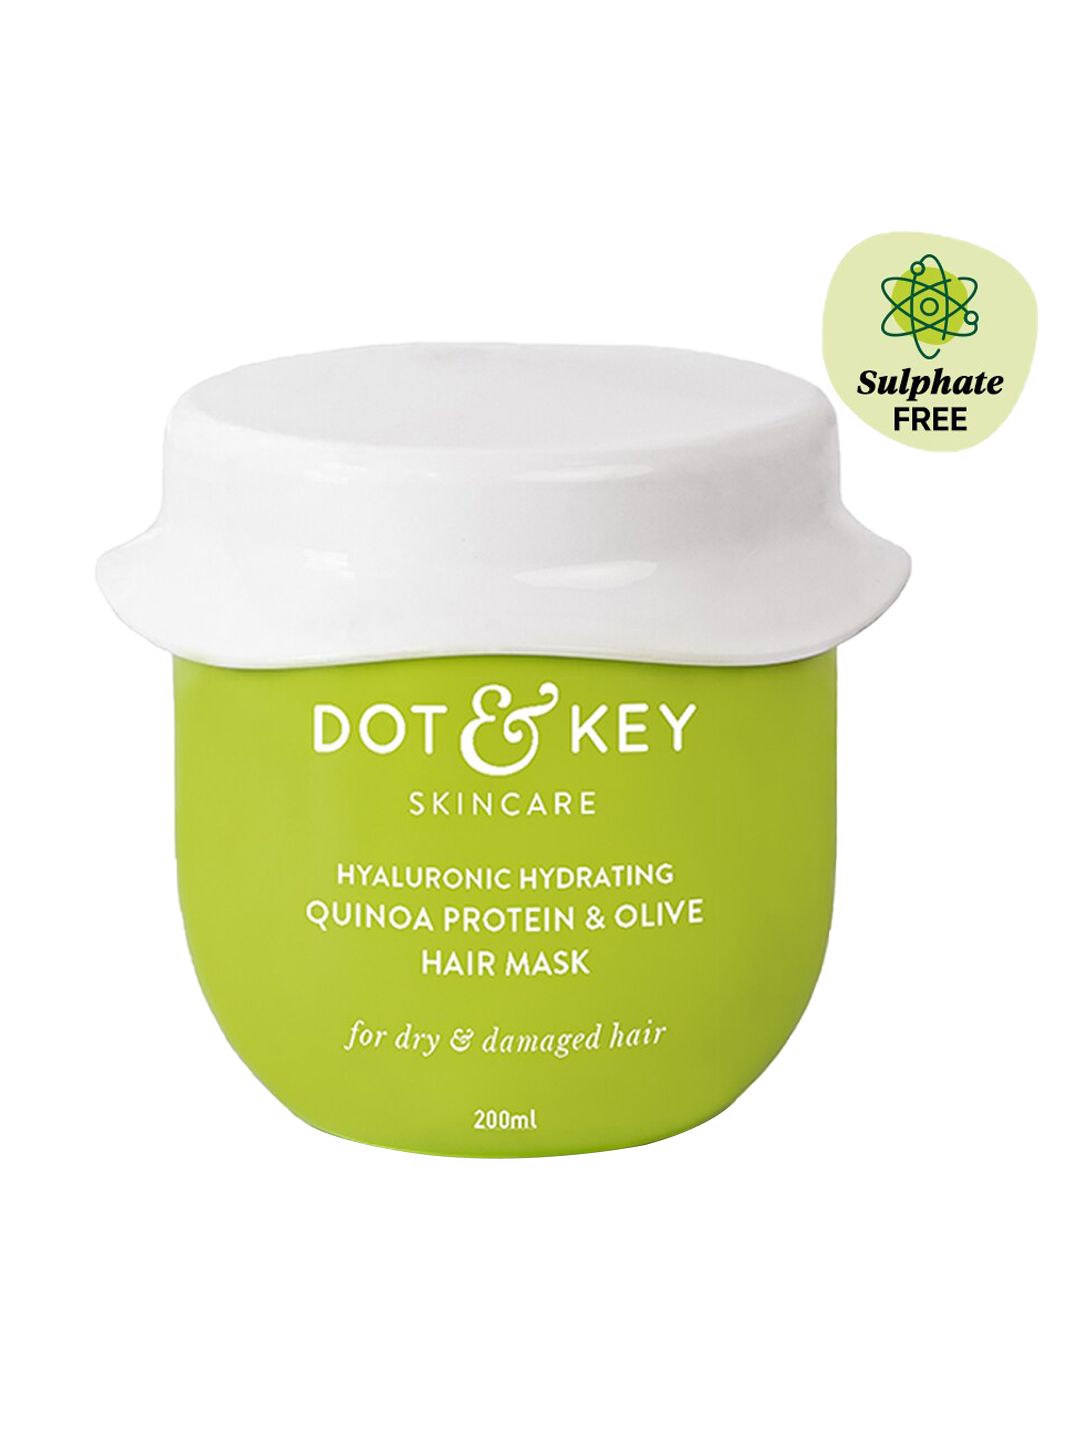 DOT & KEY Hyaluronic Hydrating Quinoa Protein & Olive Hair Mask - 200 ml Price in India